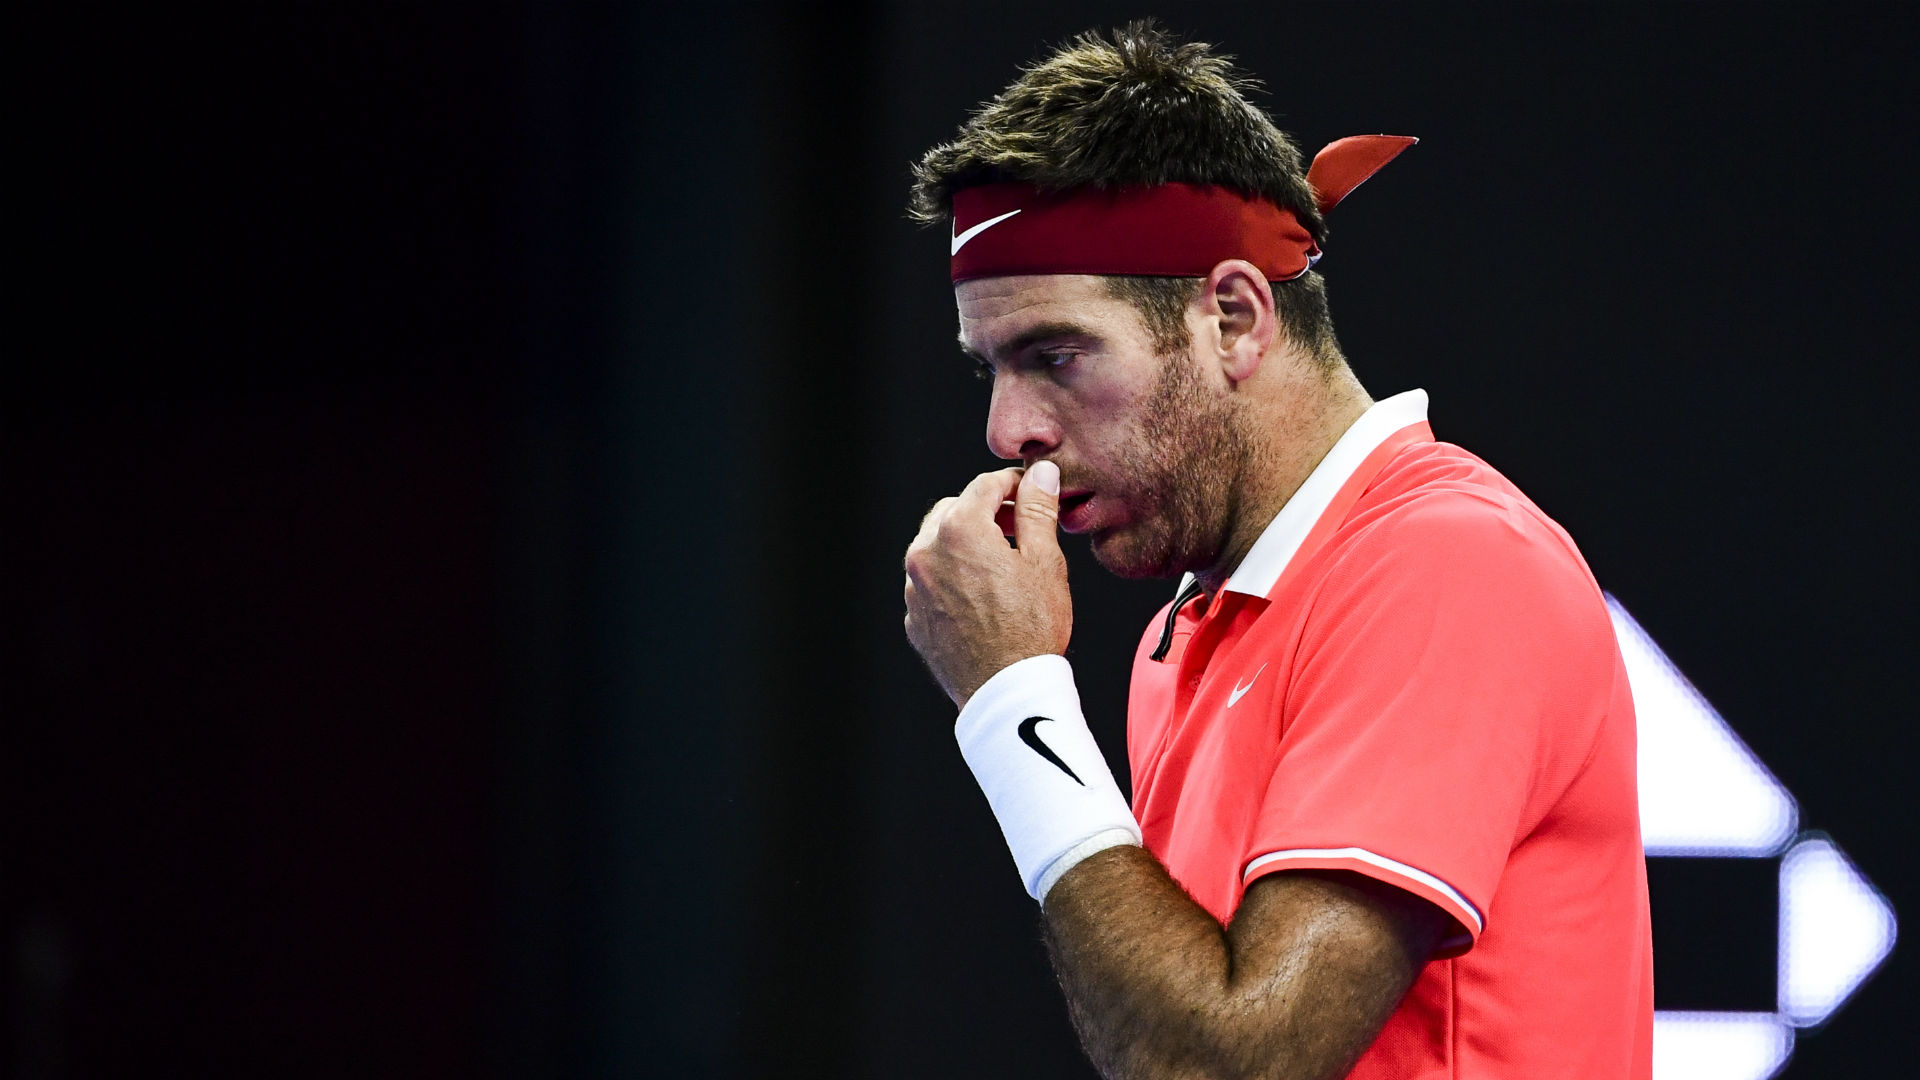 Knee injuries have prevented Juan Martin del Potro and Rafael Nadal taking their place in the draw in Miami.